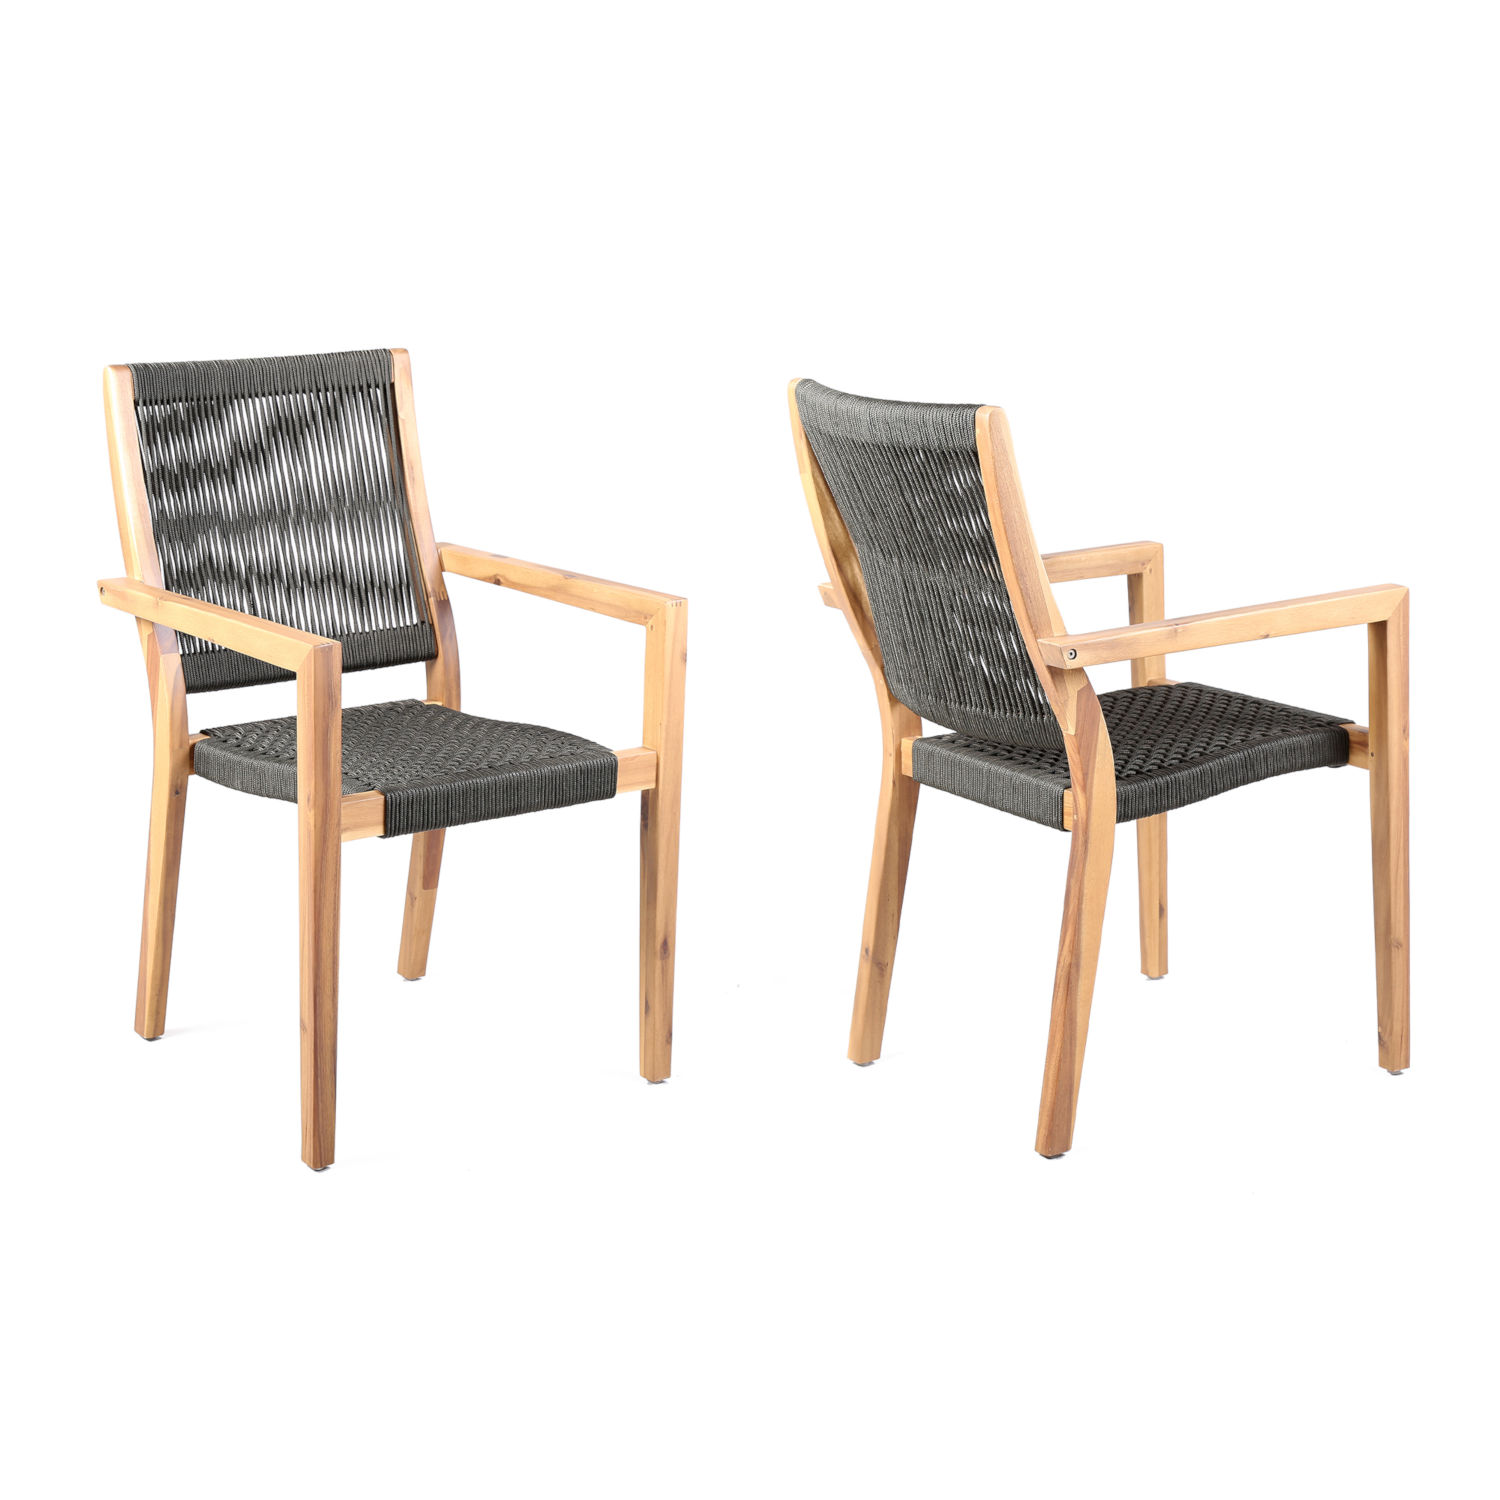 Patio Chairs Category